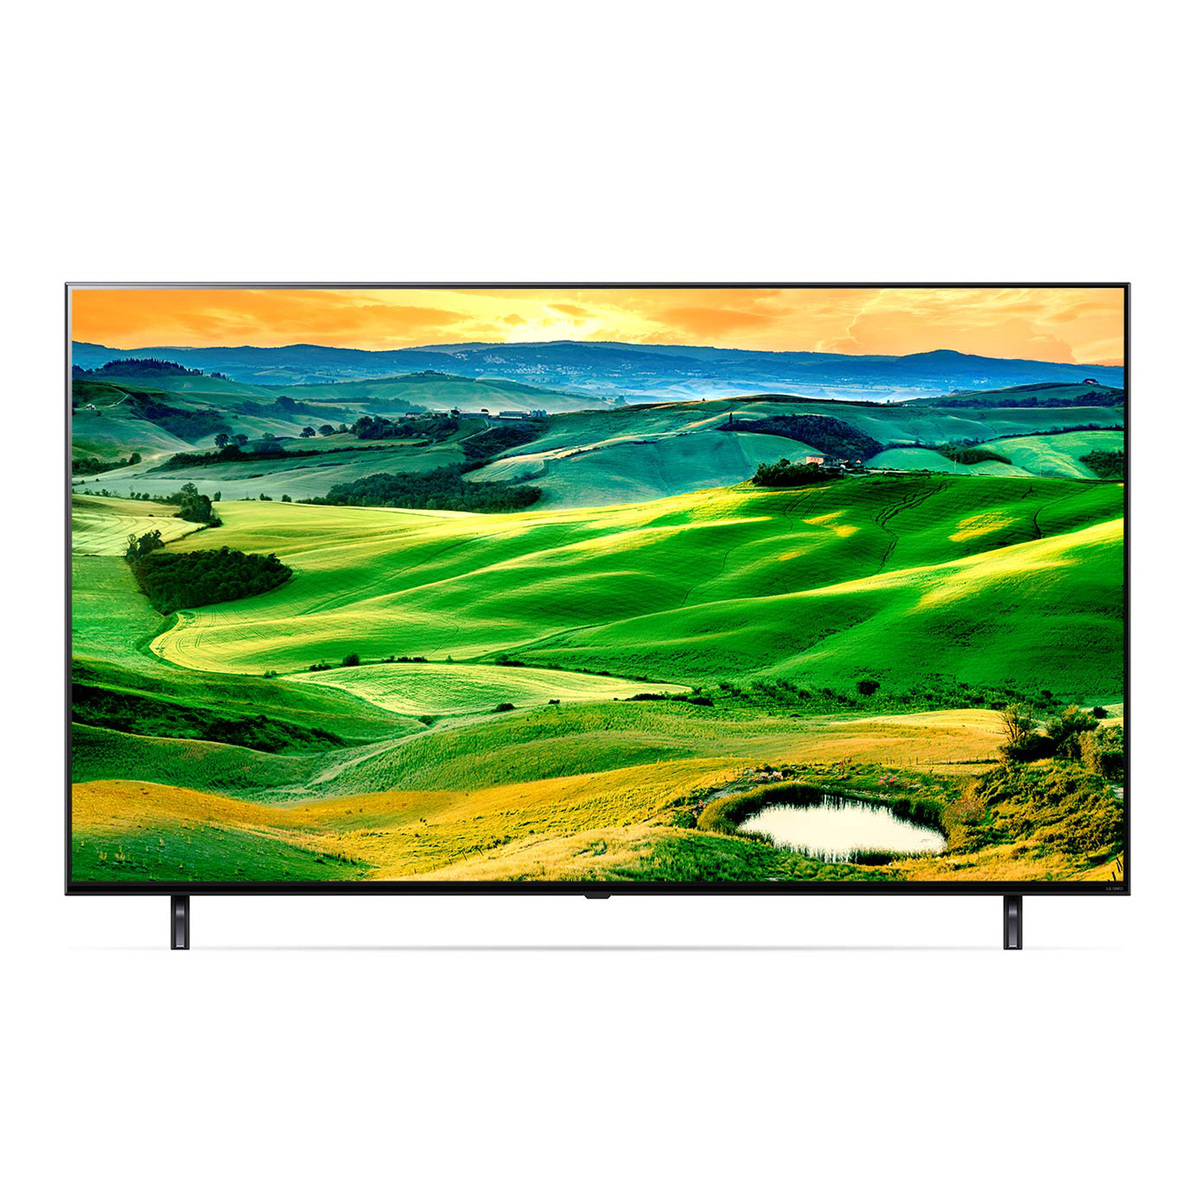 LG QNED 55 Inch TV With 4K Active HDR Cinema Screen Design, with Magic remote, HDR, WebOS from the QNED80 Series